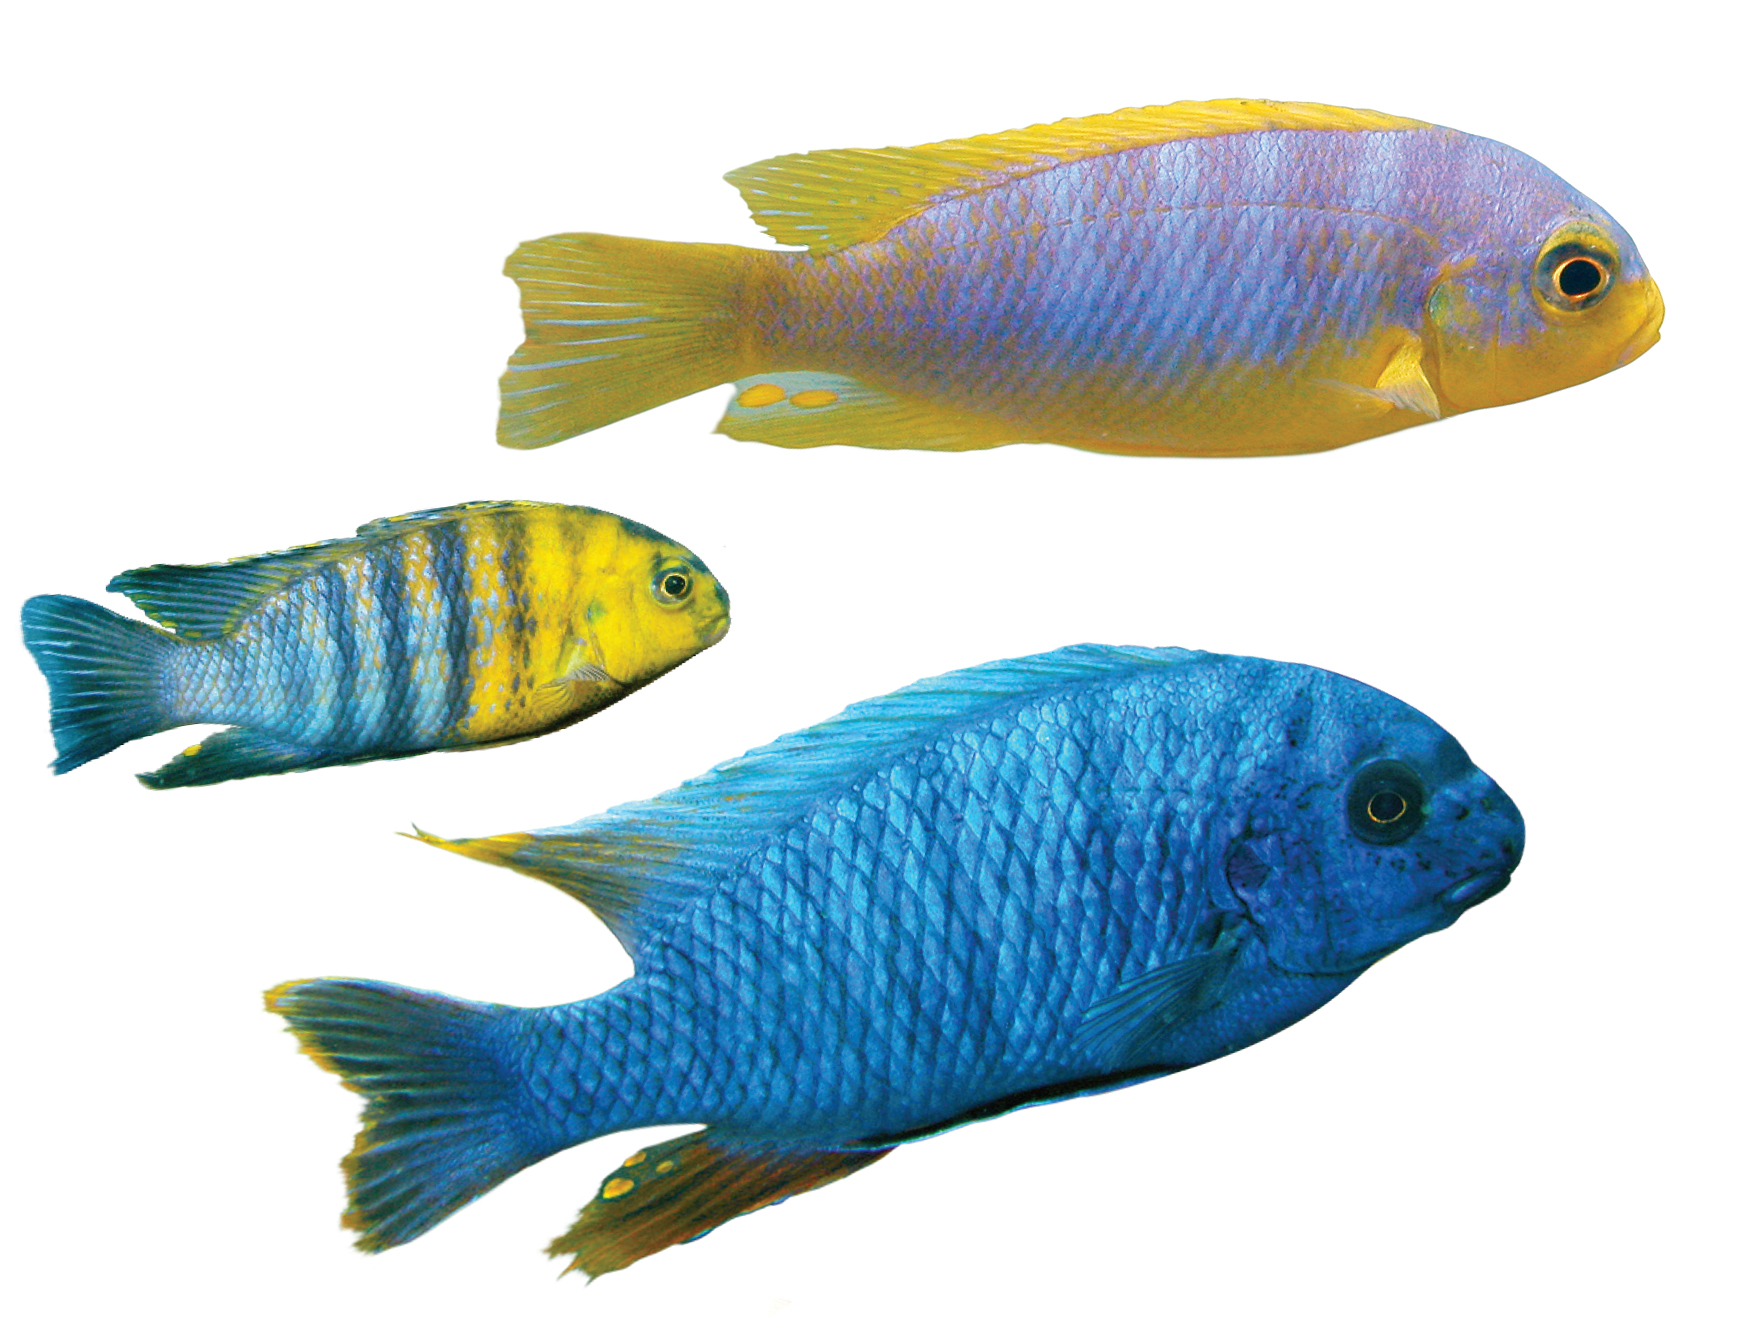 A trio of brightly-colored cichlid fish. One is blu, one is blue and yellow with black striped, and one is lavender with a yellow belly and fins.